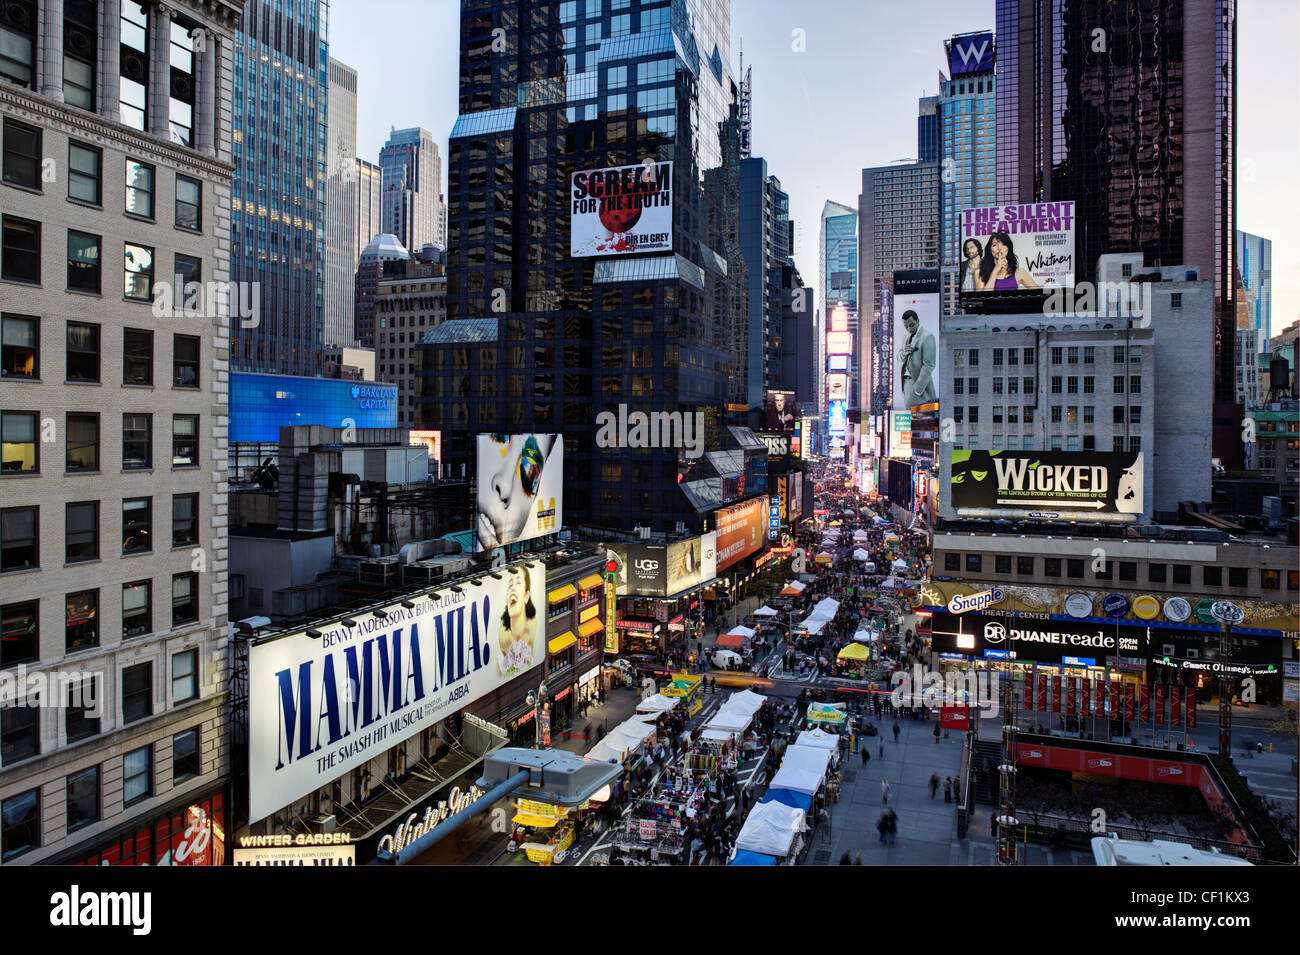 Manhattan, Broadway looking towards Times Square, New York, United States of America Stock Photo